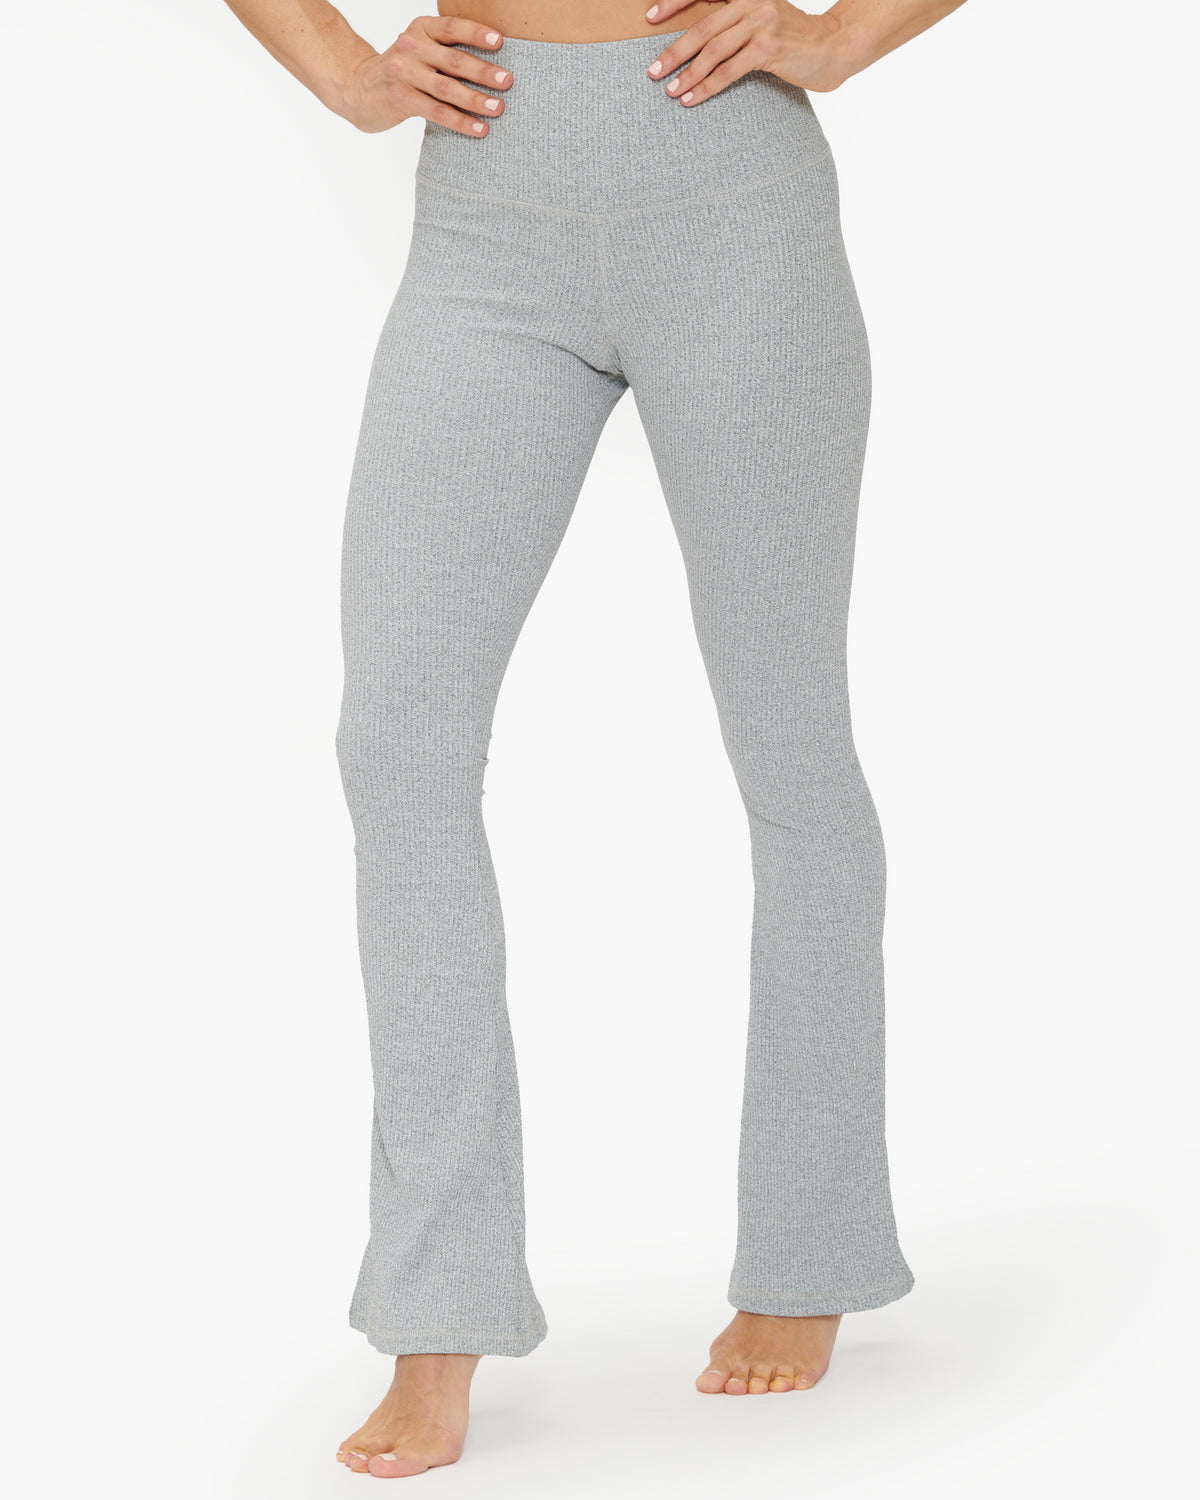 Strut This The Beau Pant